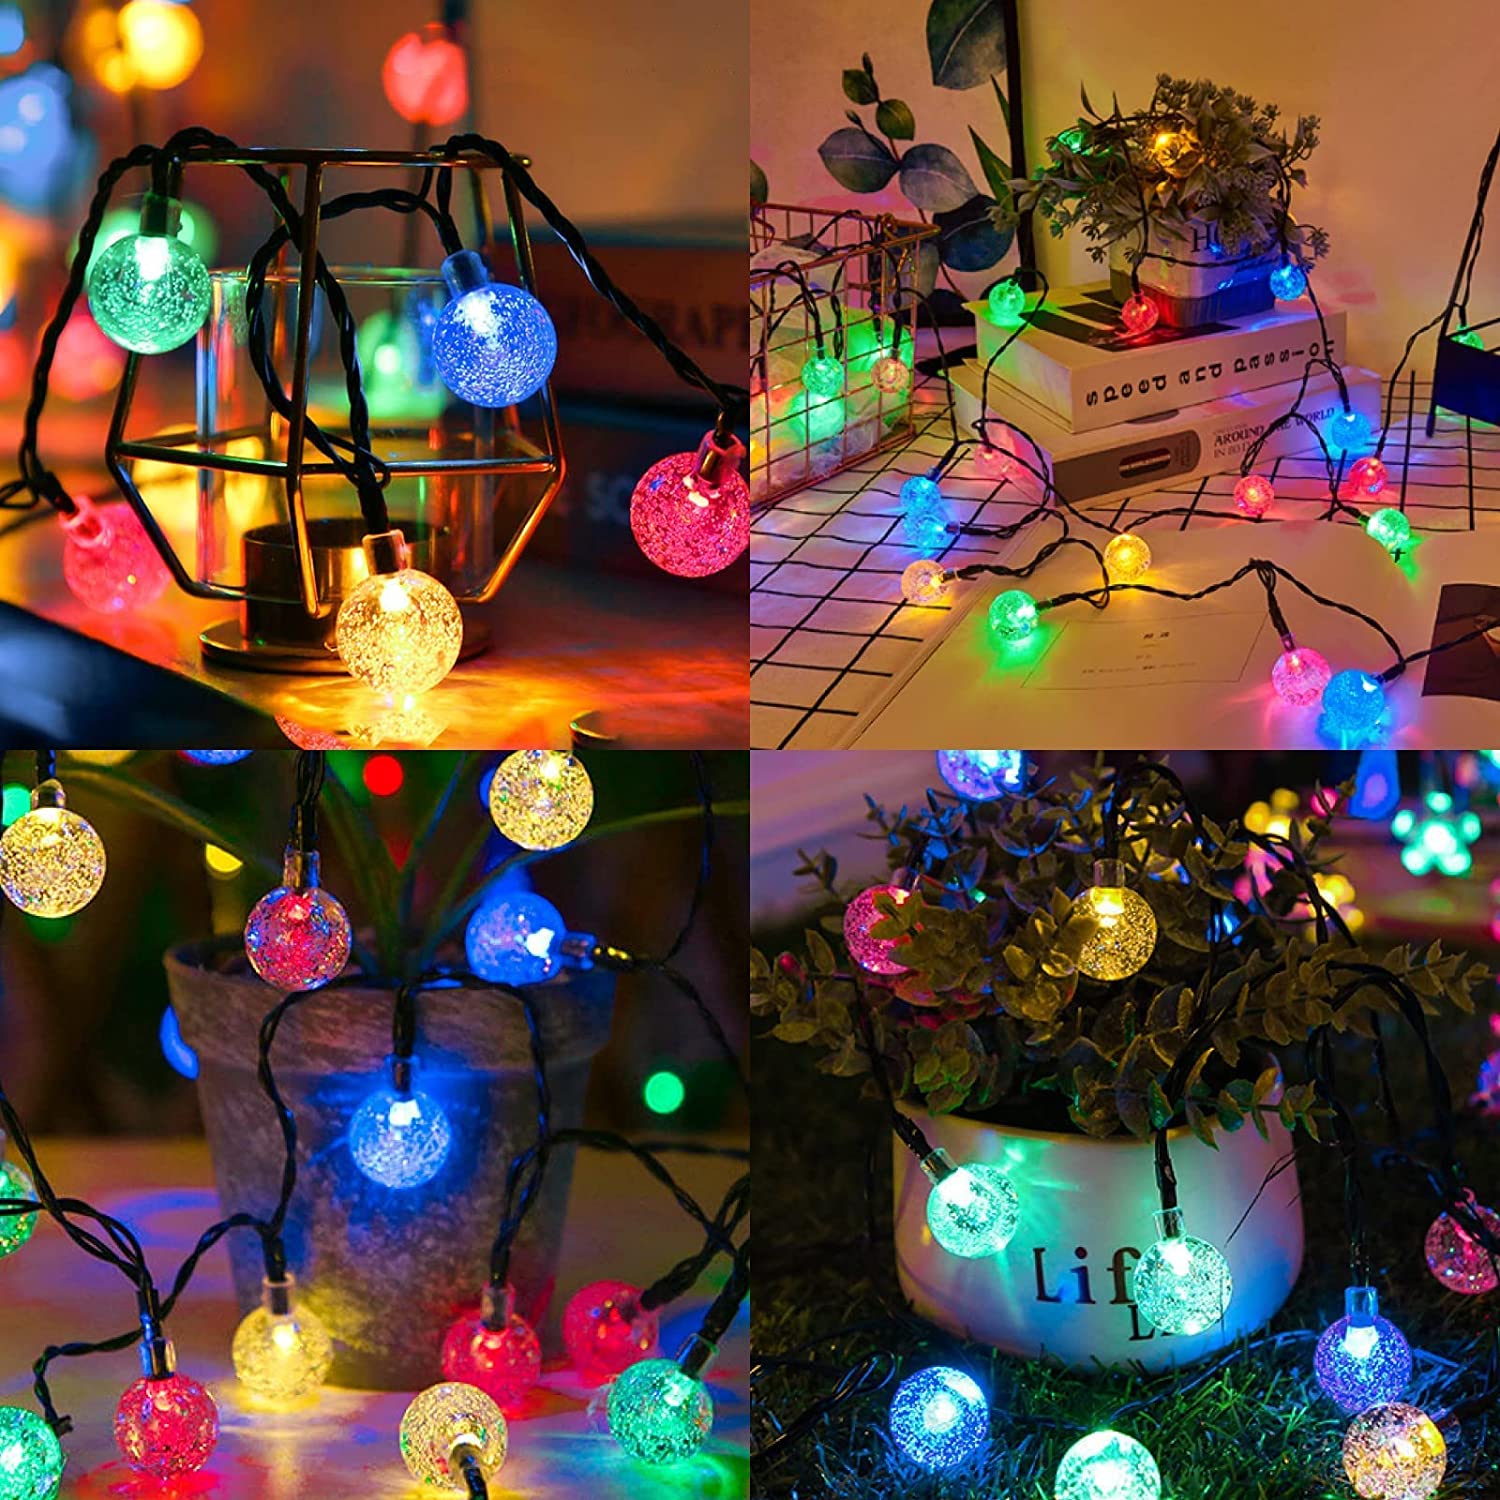 Solar Fairy String Lights with 8 Modes Outdoor, 21.3 Feet 30 LED Color Crystal Globe Lights, 8 Modes Solar Patio Lights for Garden, Fence, Tree, Wedding, Party Christmas Decor